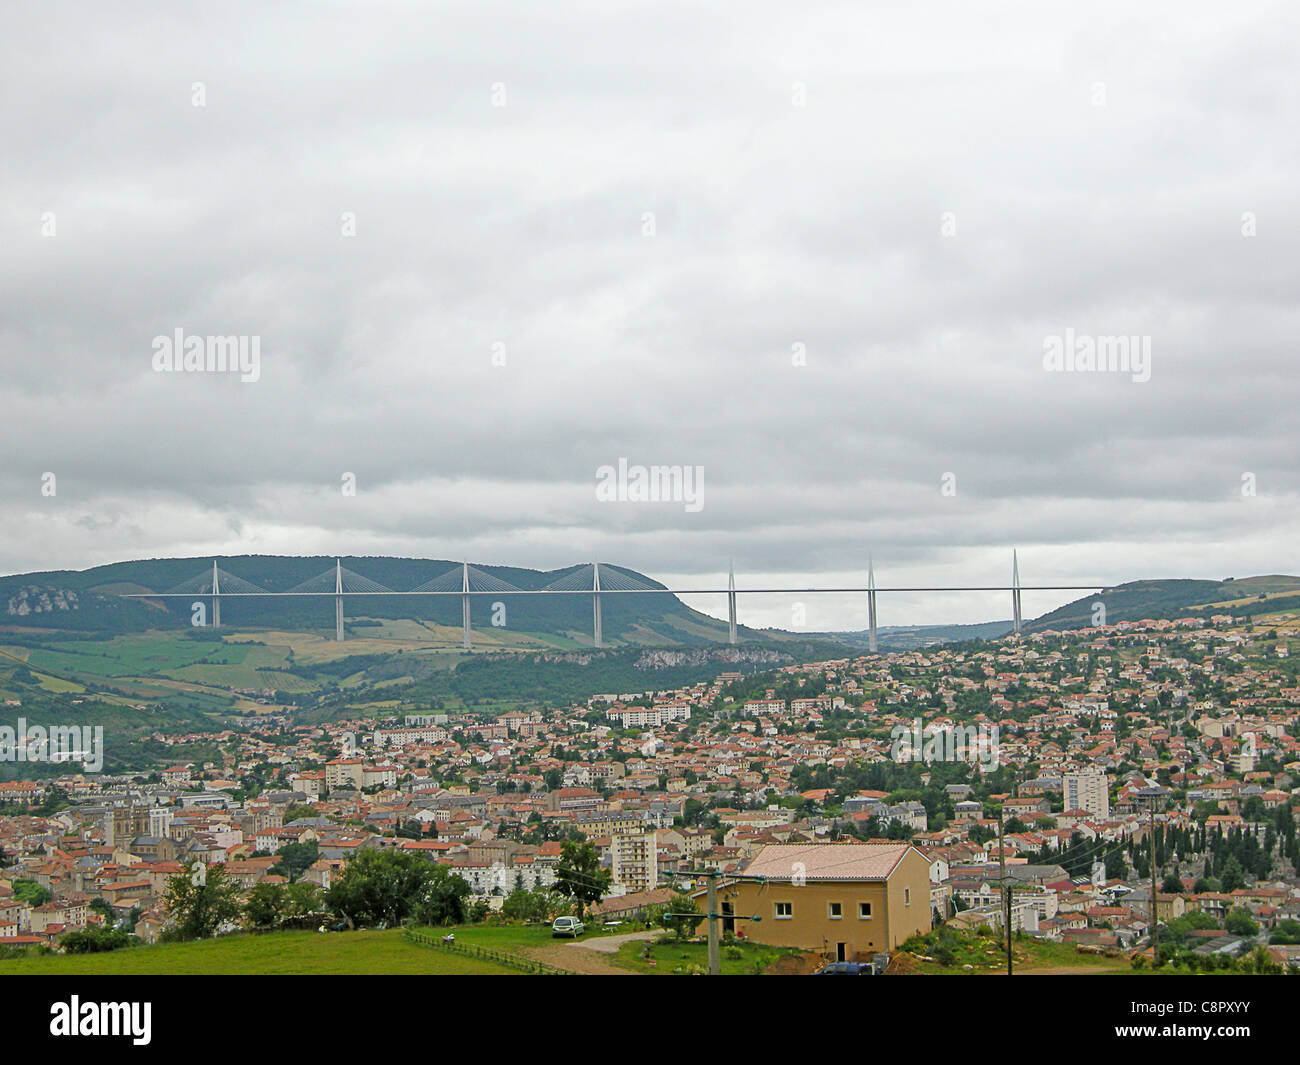 France, Millau, Millau Viaduct, view towards cable-stayed road bridge across valley of River Tarn Stock Photo